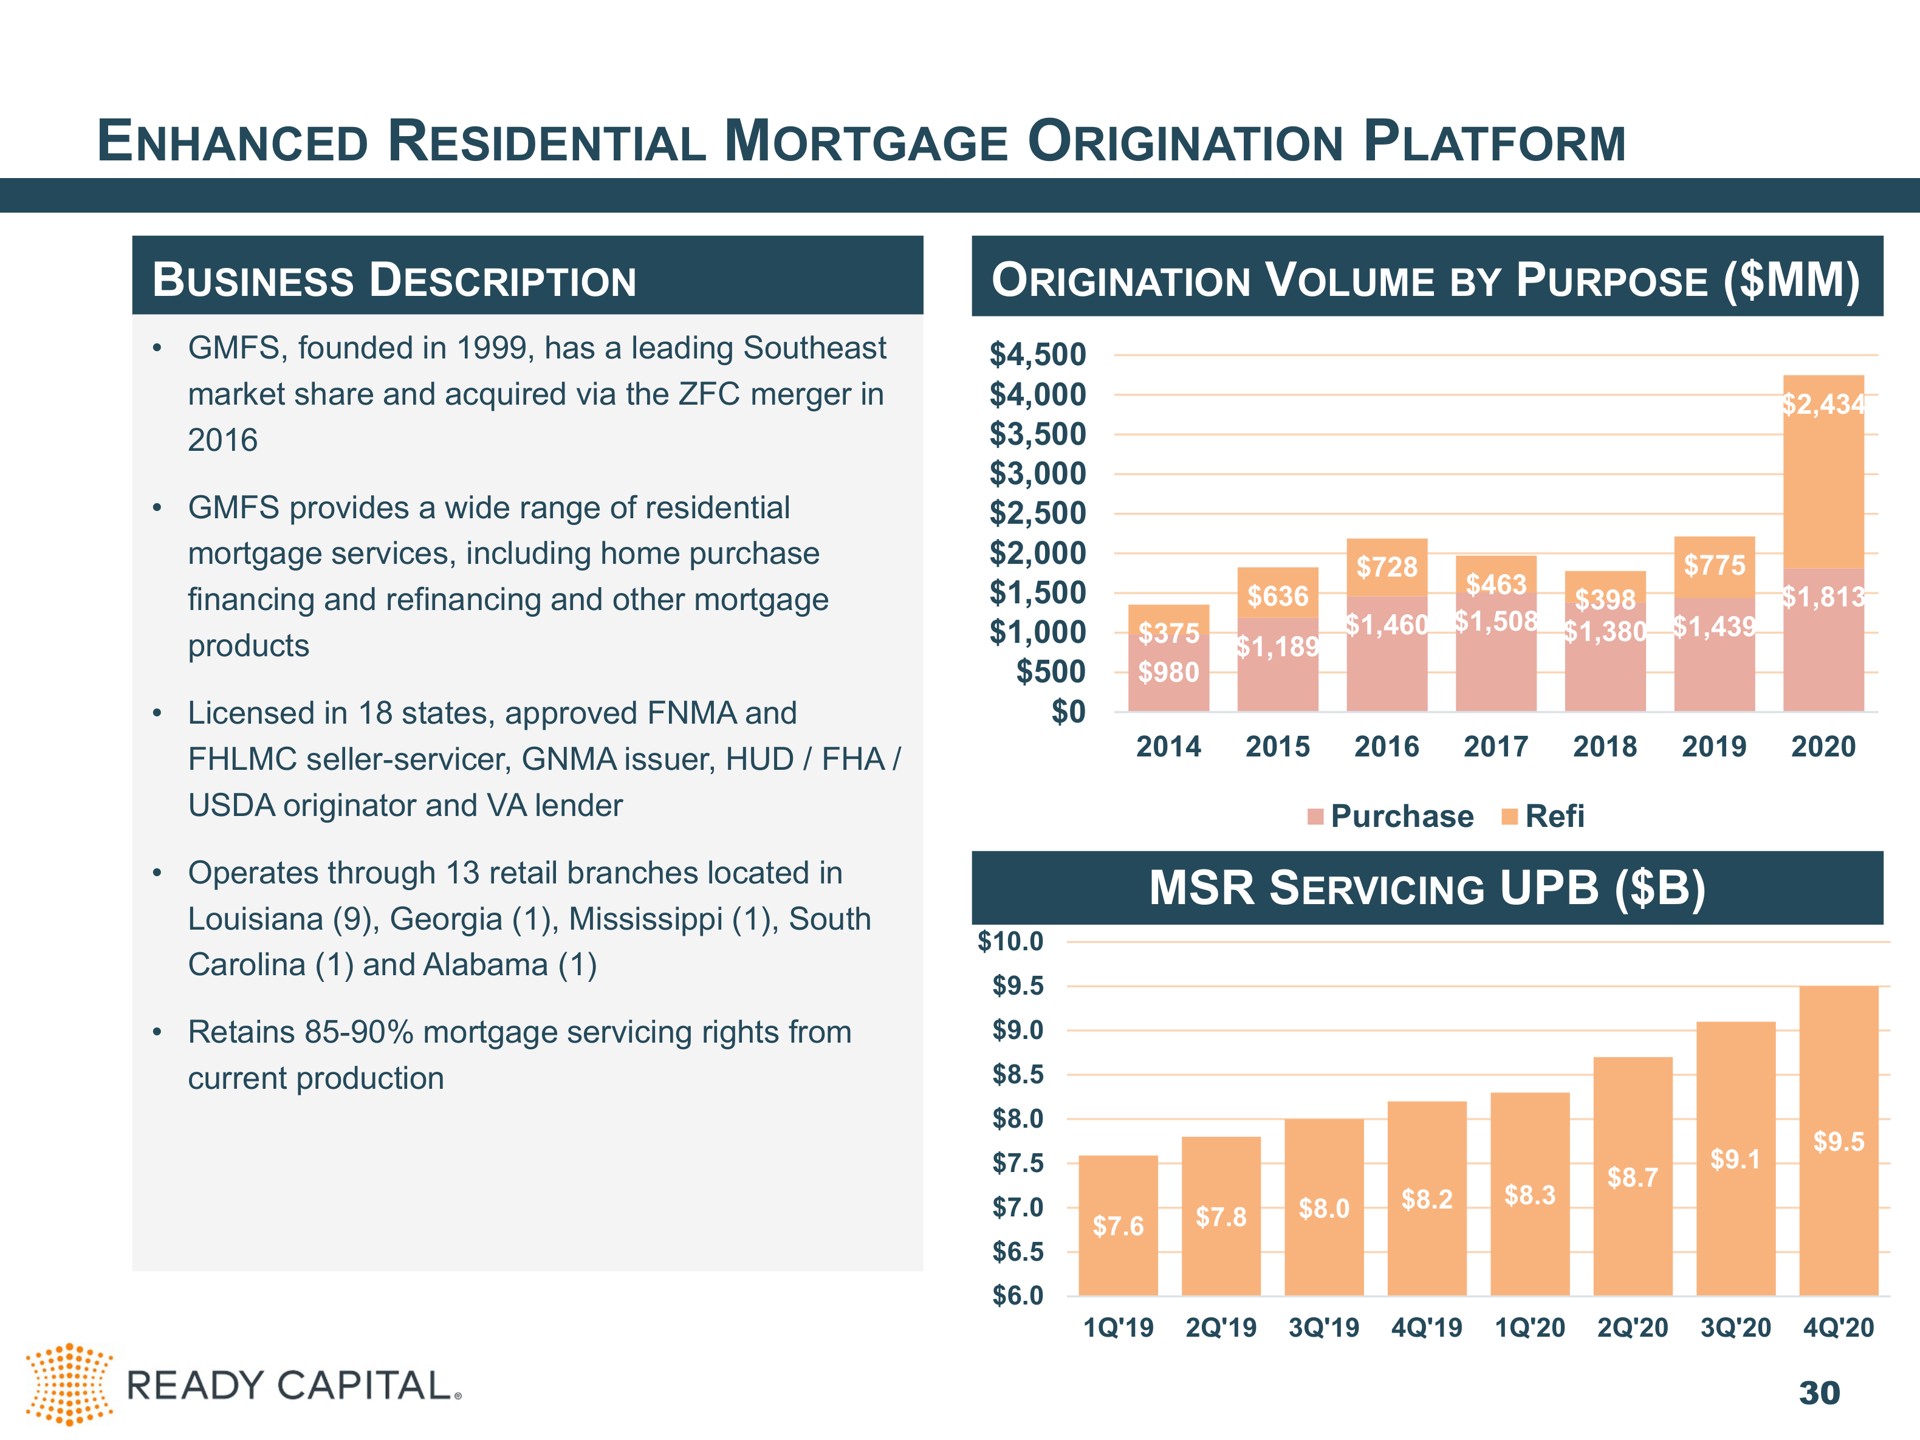 enhanced residential mortgage origination platform business description founded in has a leading southeast market share and acquired via the merger in provides a wide range of residential mortgage services including home purchase financing and refinancing and other mortgage products licensed in states approved and seller issuer hud originator and lender operates through retail branches located in south and retains mortgage servicing rights from current production origination volume by purpose purchase servicing i ready capital | Ready Capital